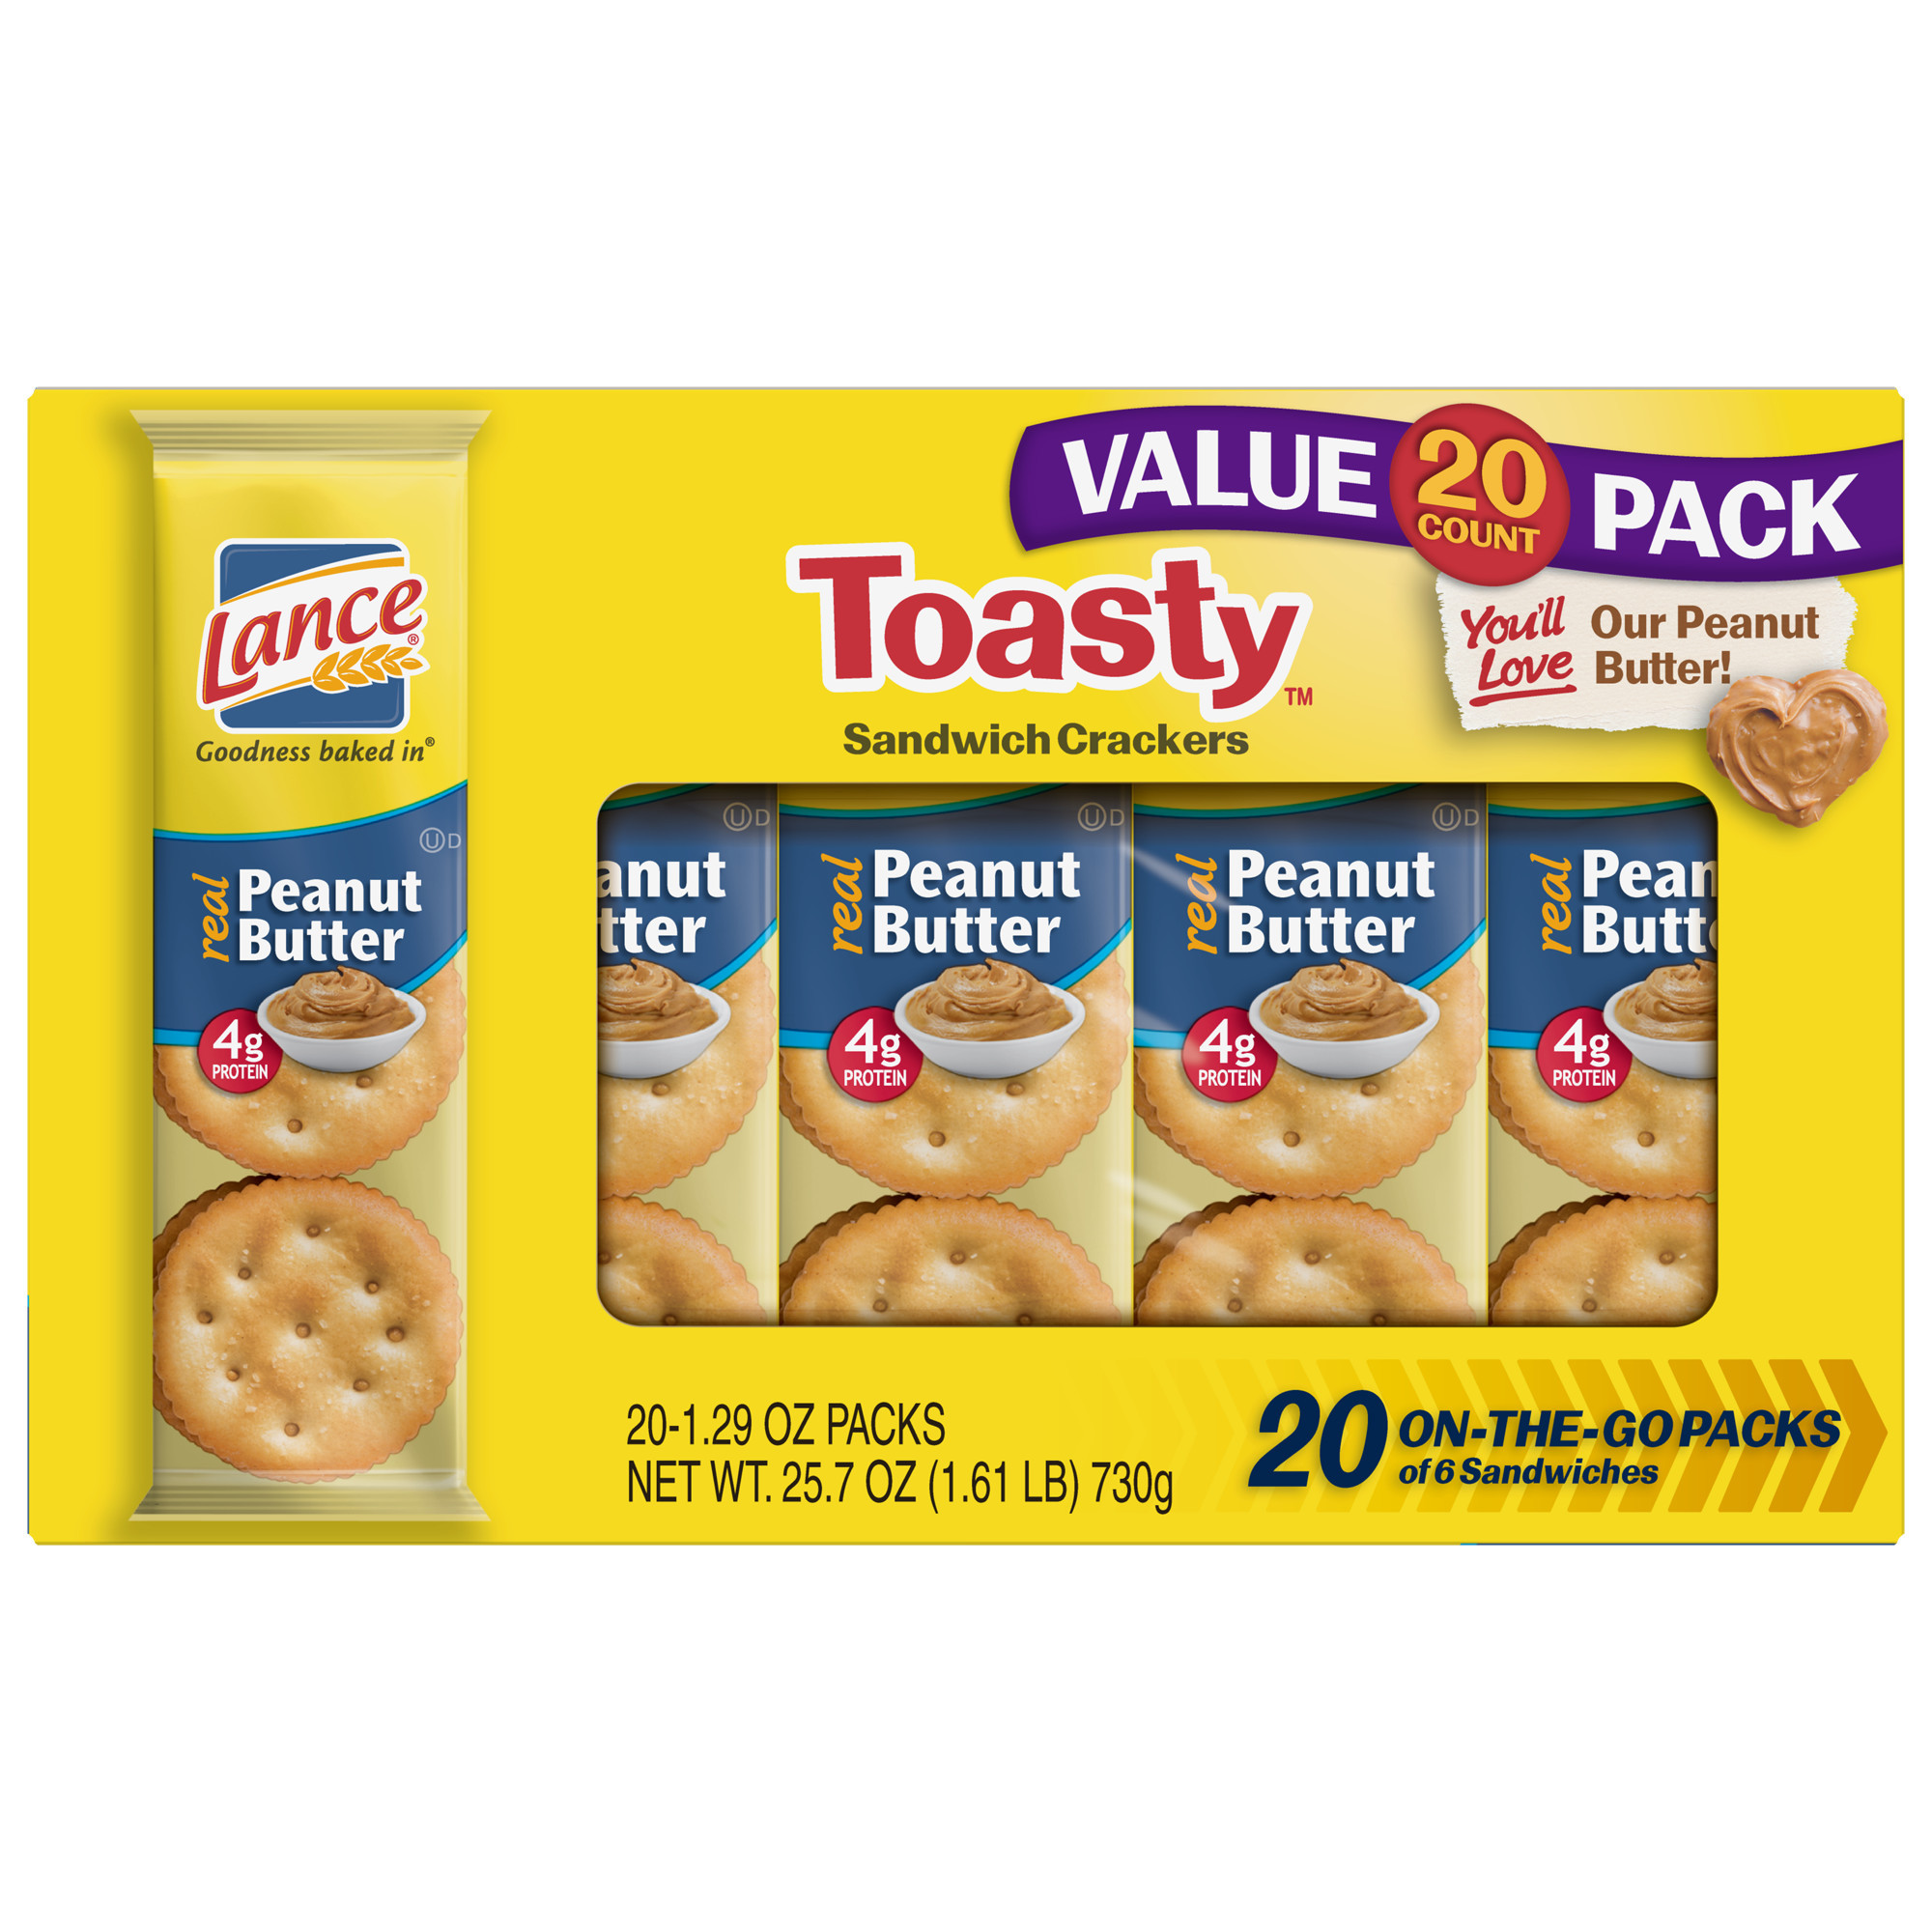 Lance Sandwich Crackers
 Lance Sandwich Crackers Toasty Peanut Butter 20 Count